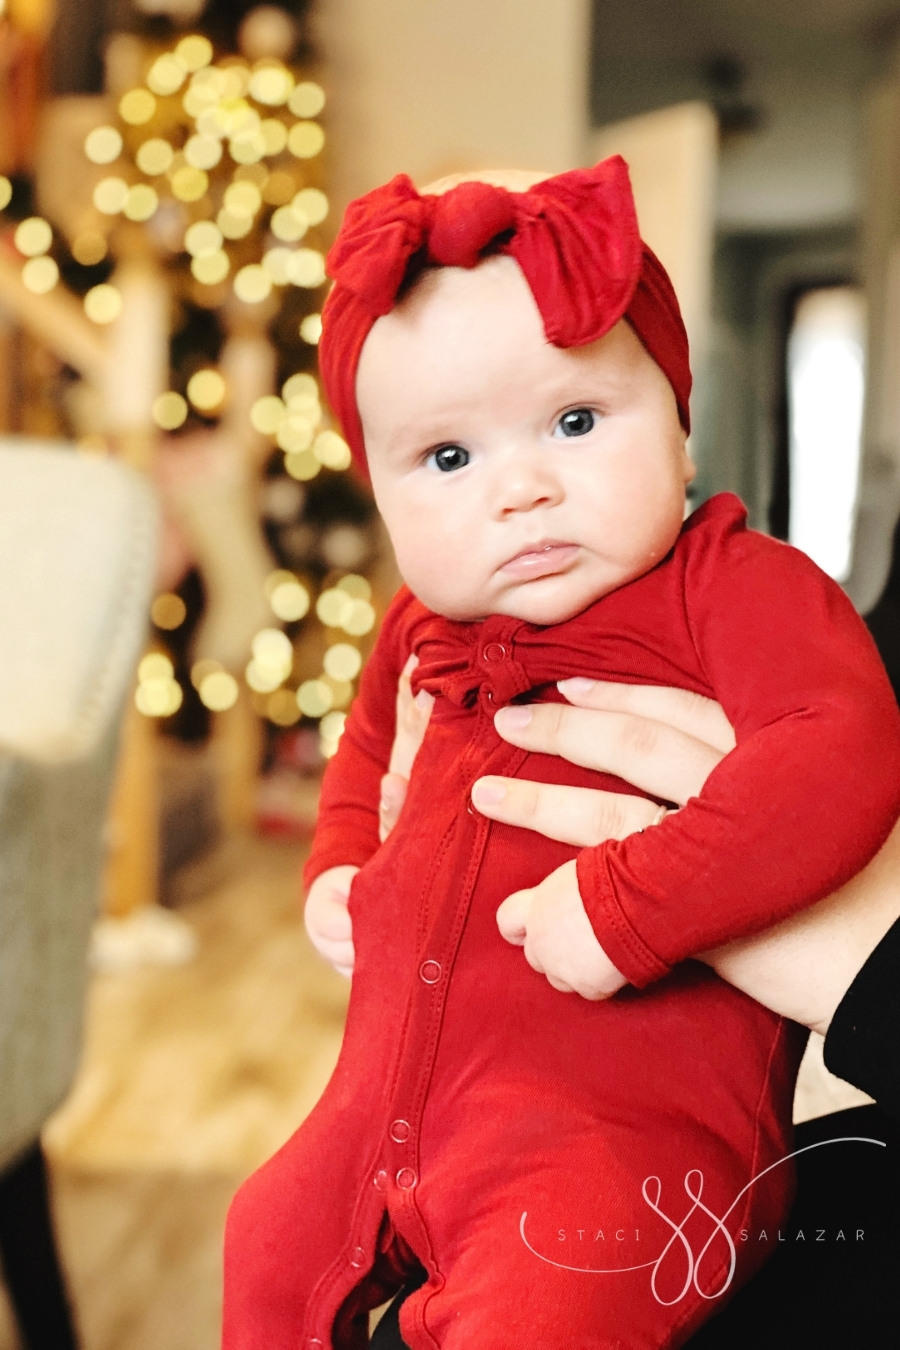 baby in red sleeper and bow looking at camera with bokeh holiday lights in background